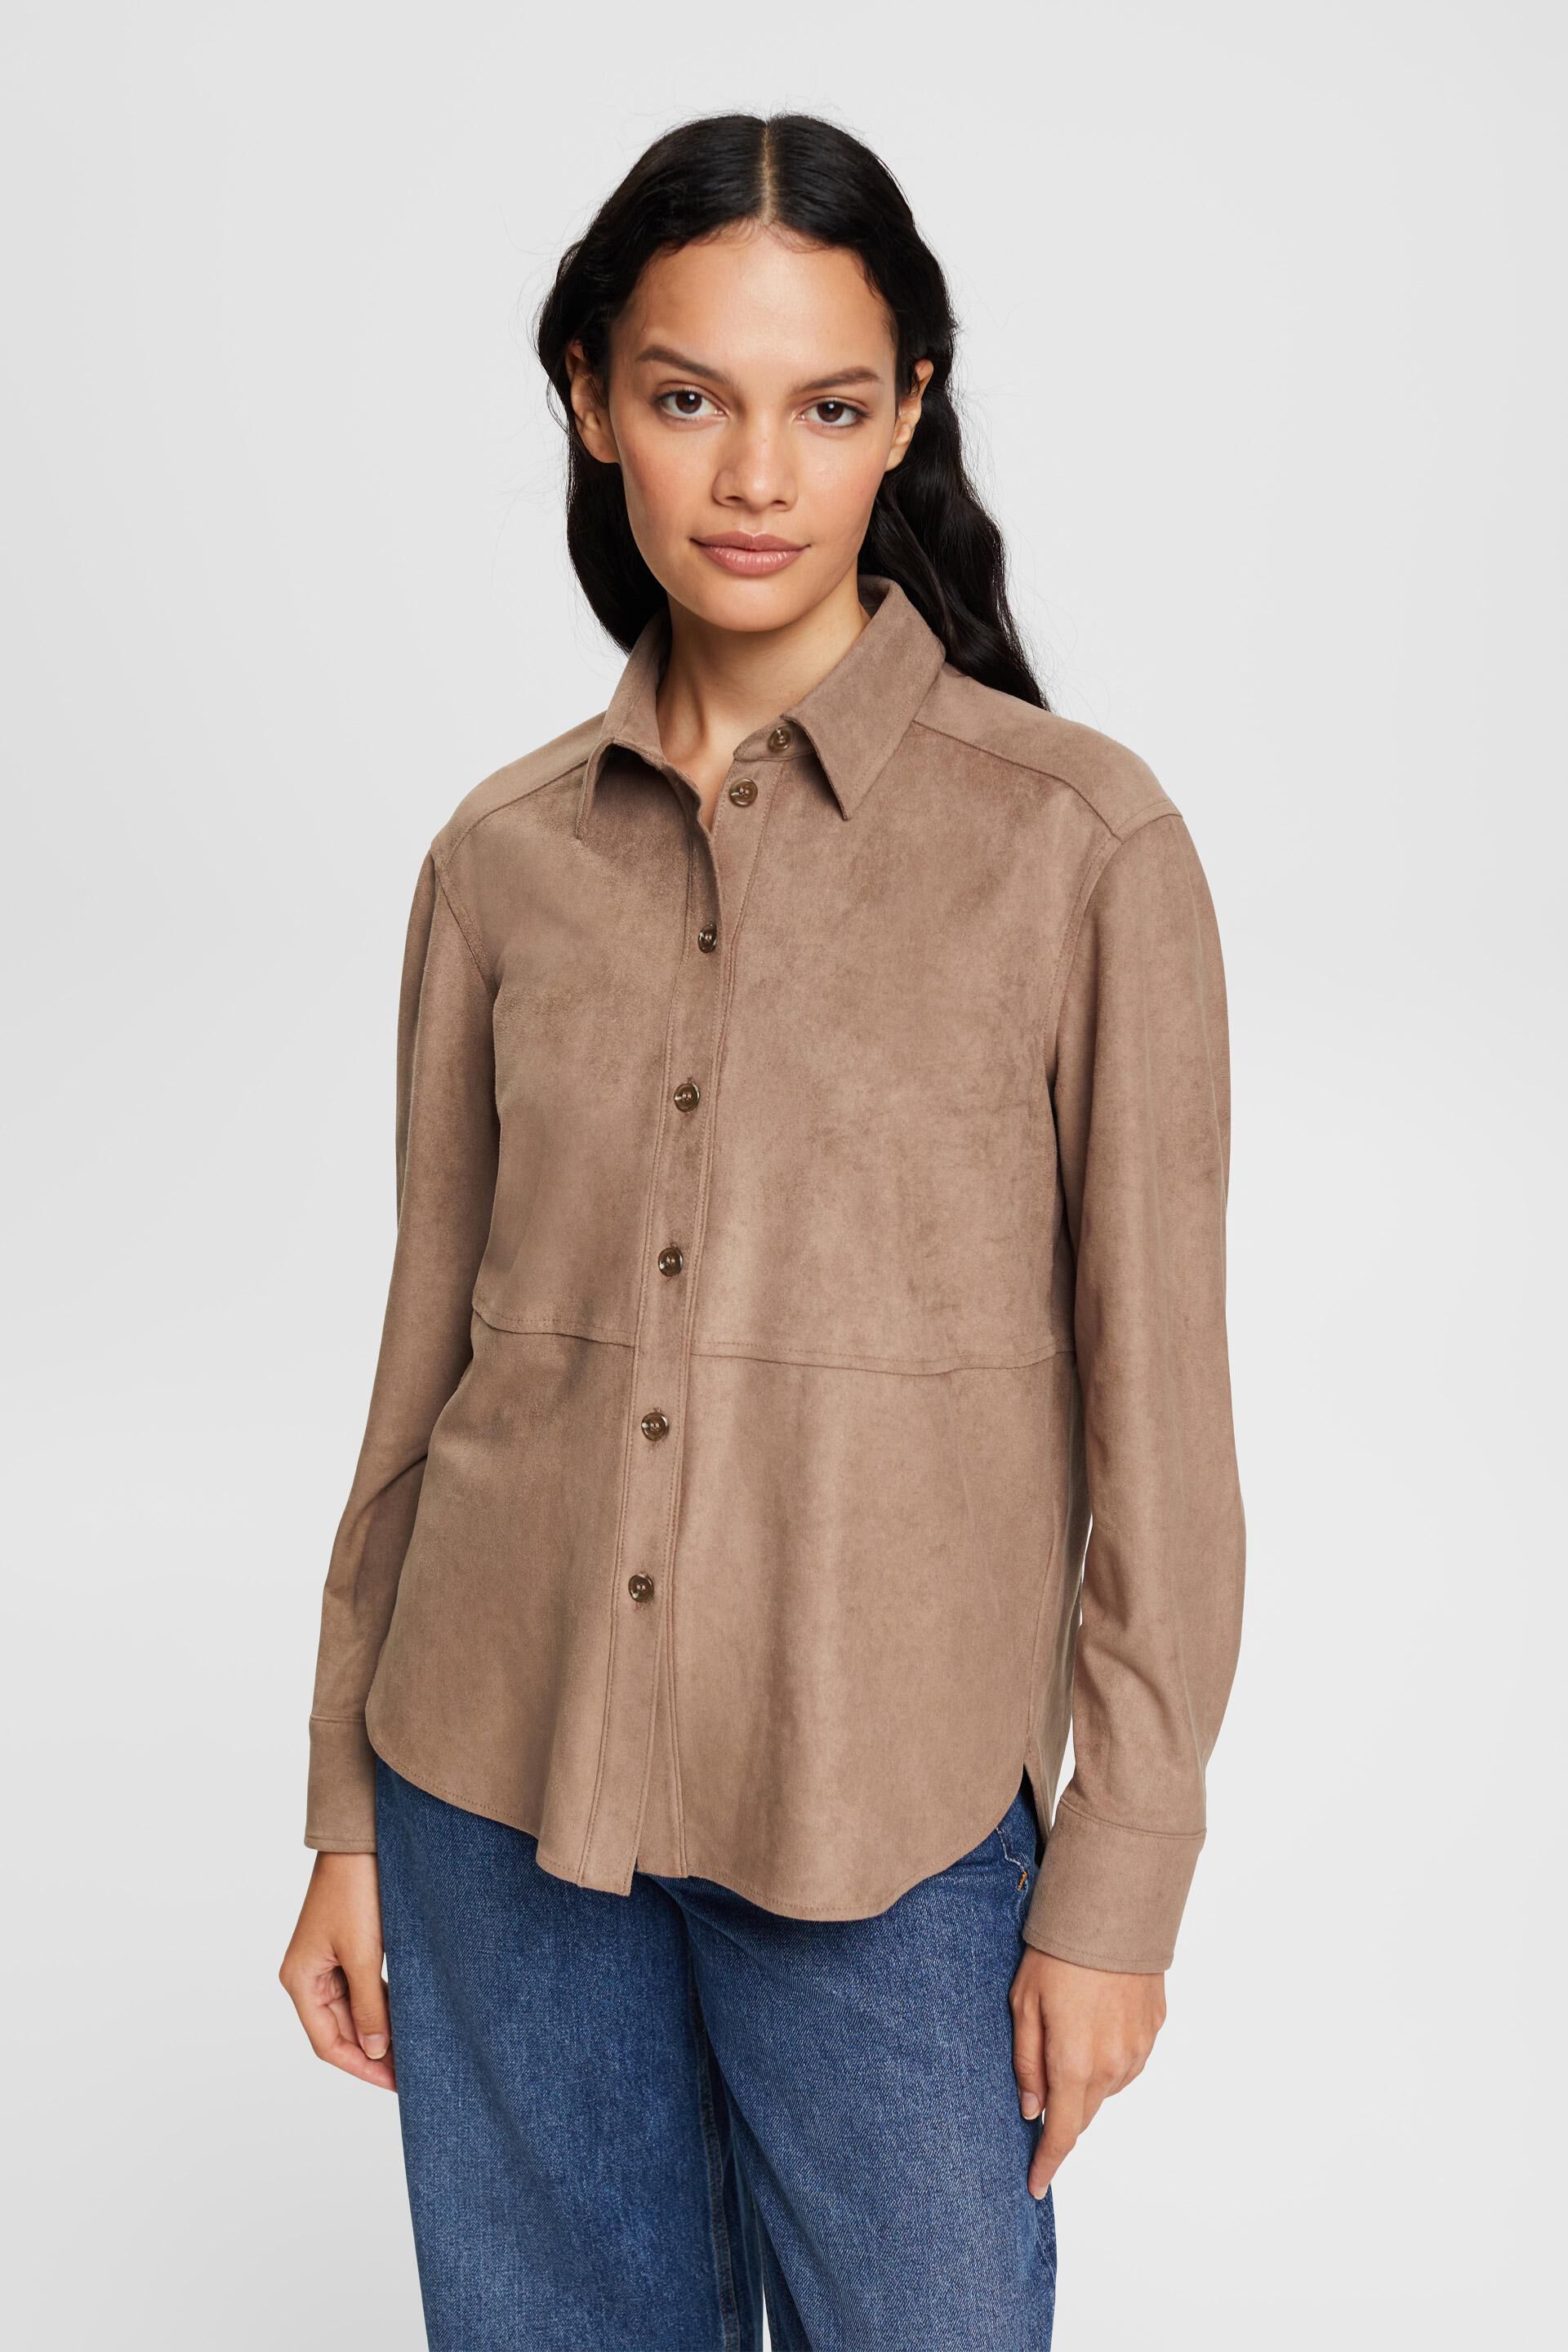 & other stories Ruche blouse blauw-wit gestreept patroon casual uitstraling Mode Blouses Ruche blouses 